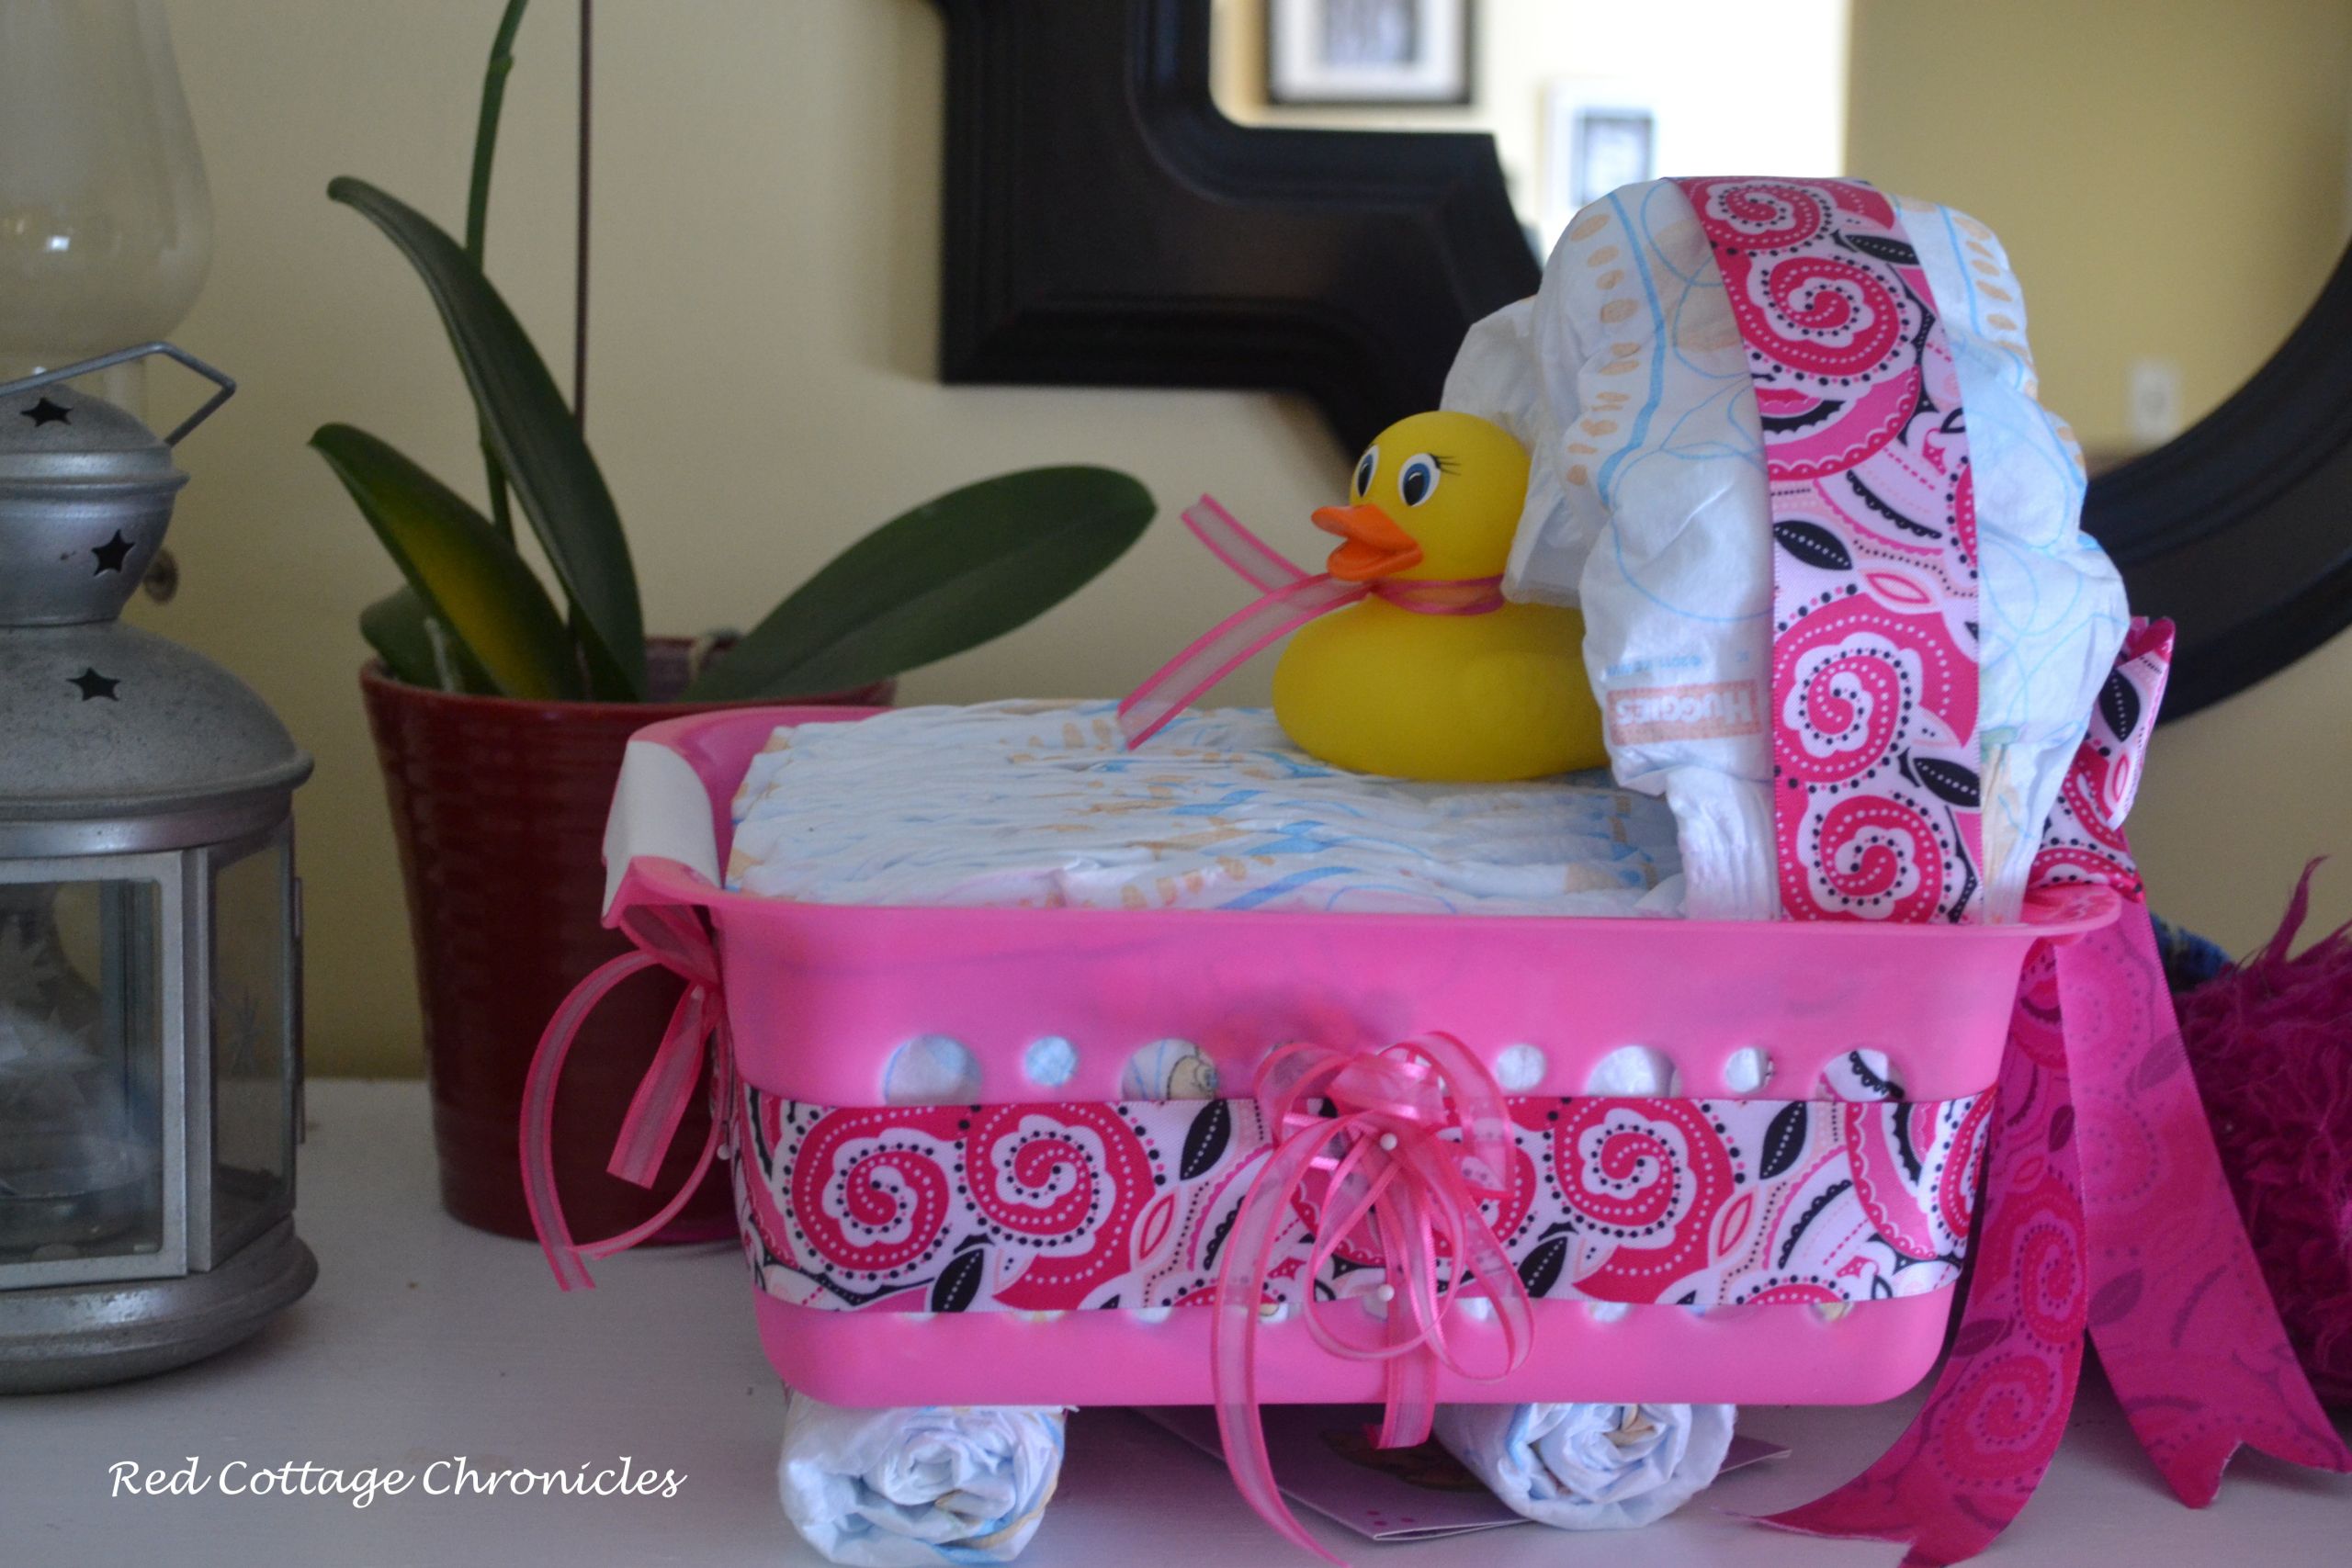 Baby Bath Gift Ideas
 This Baby Shower Gift Idea is a practical t any new mom